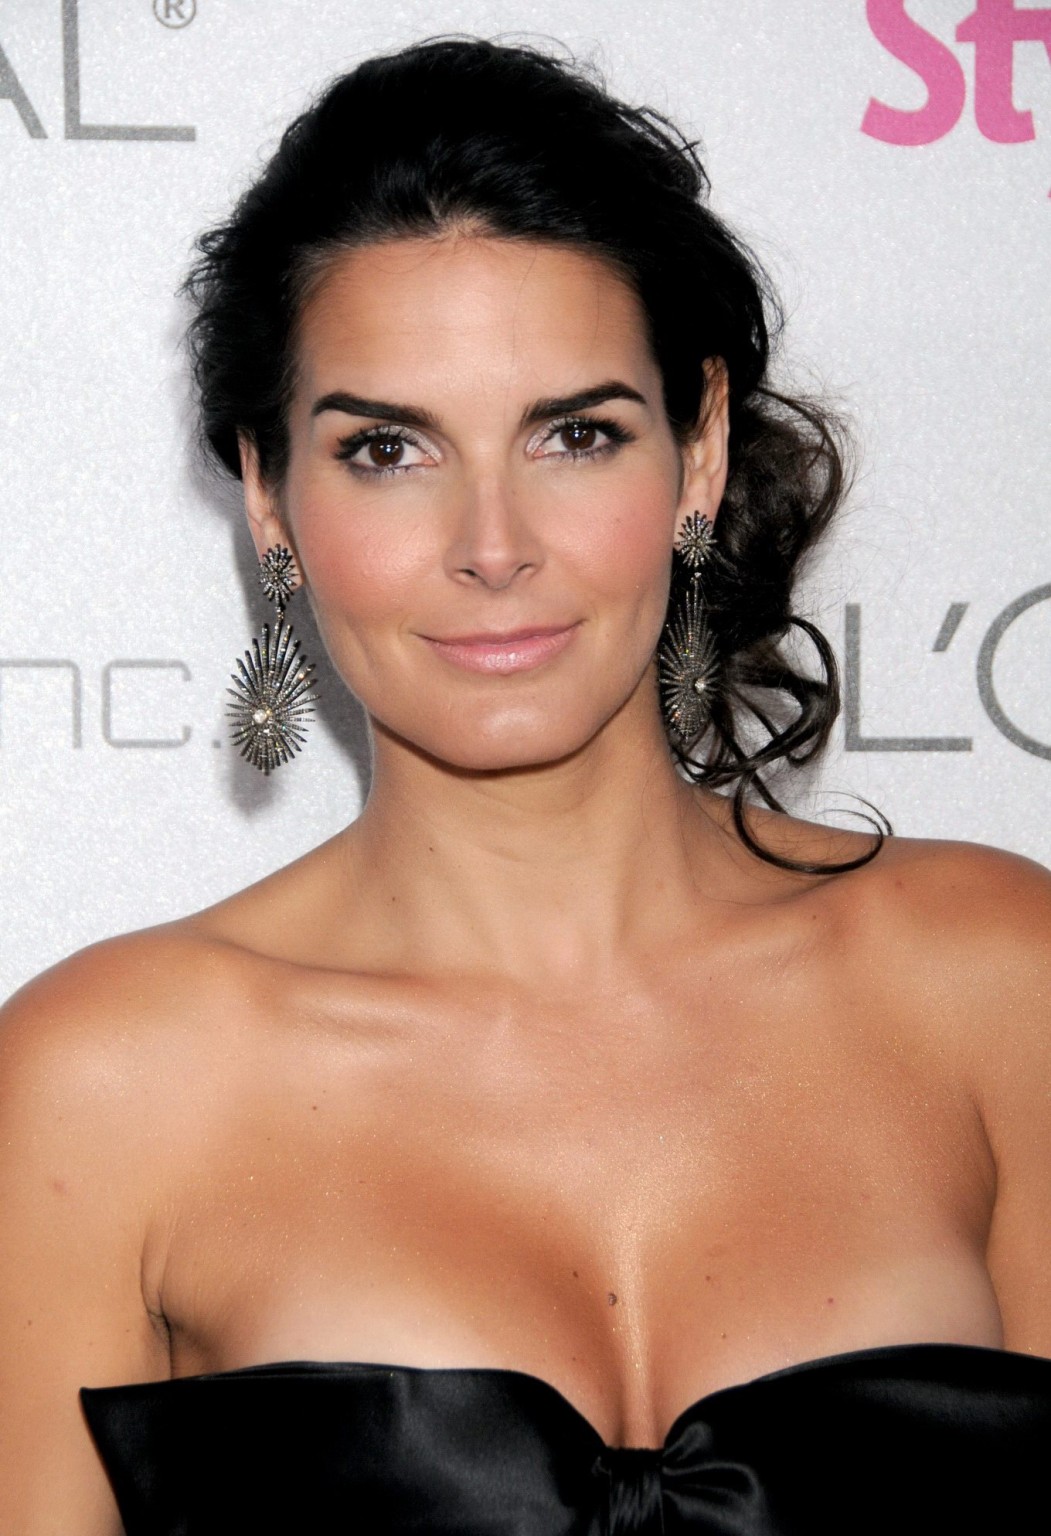 Angie Harmon busty  braless in low cut outfit at People StyleWatch 'A Night Of R #75318974